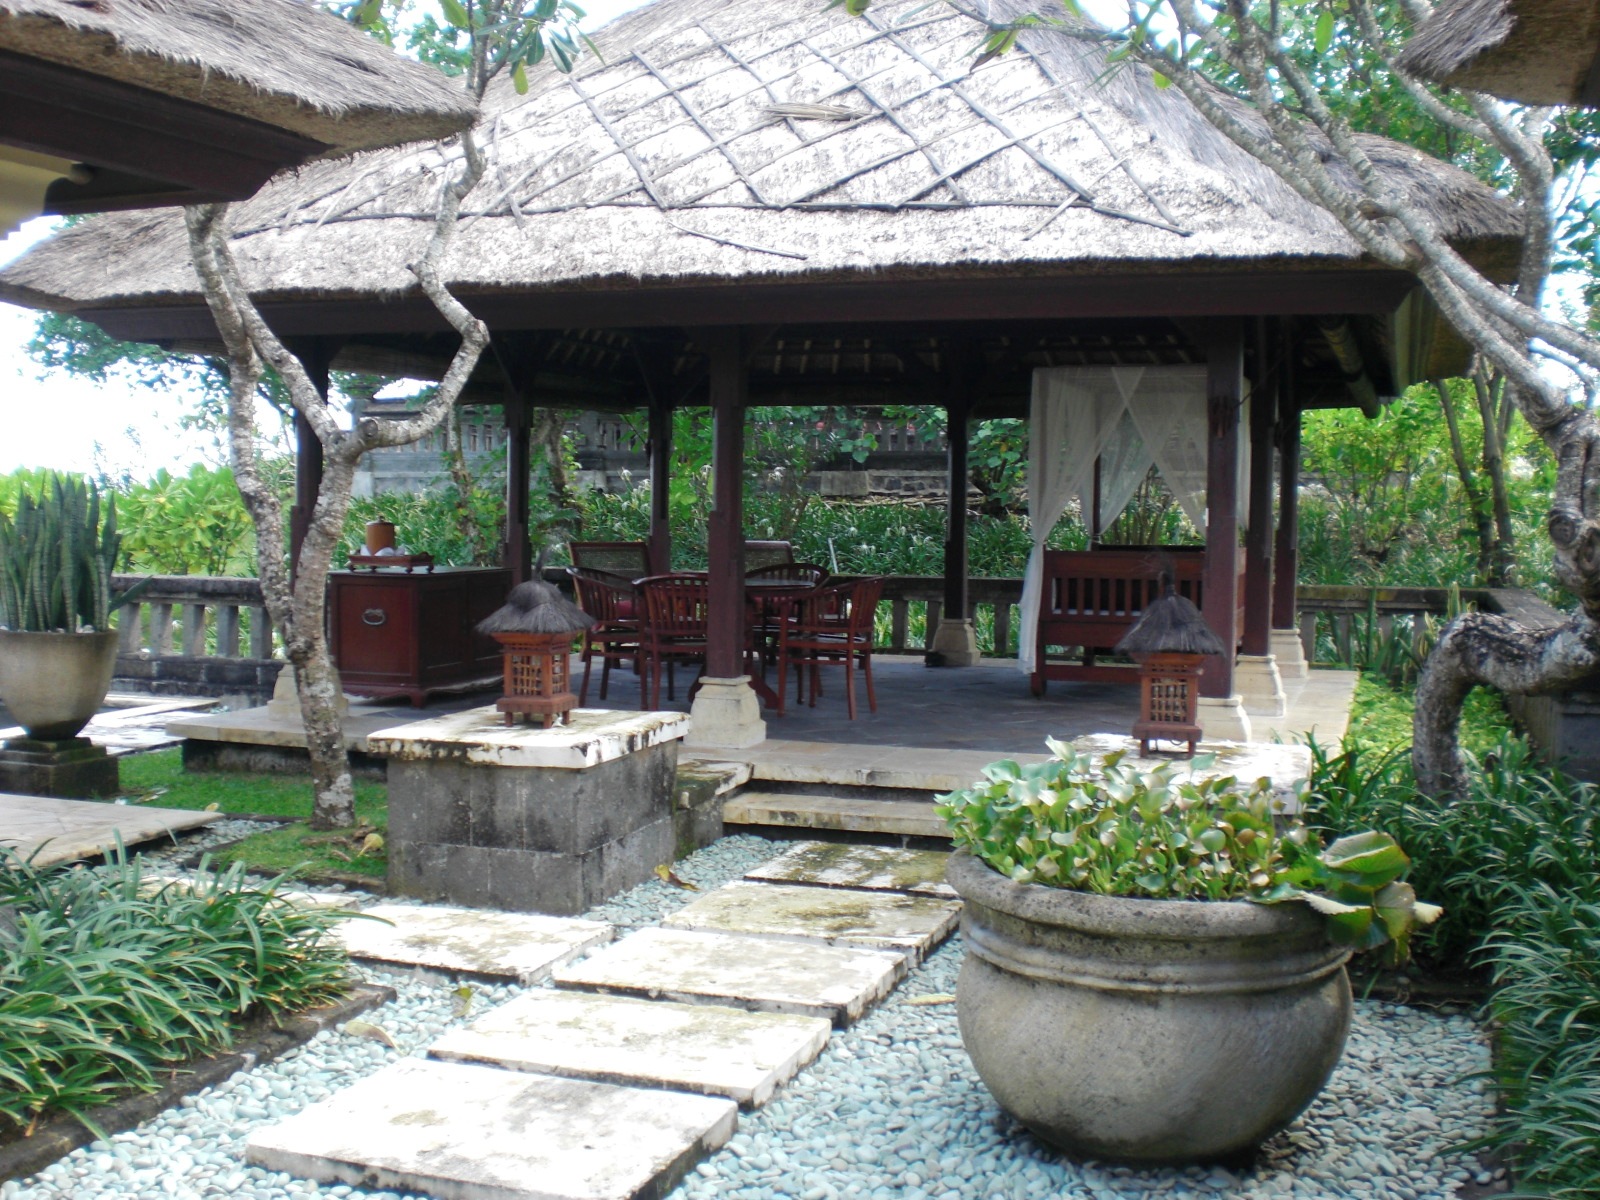 Balinese style gazebo with thatched roofing